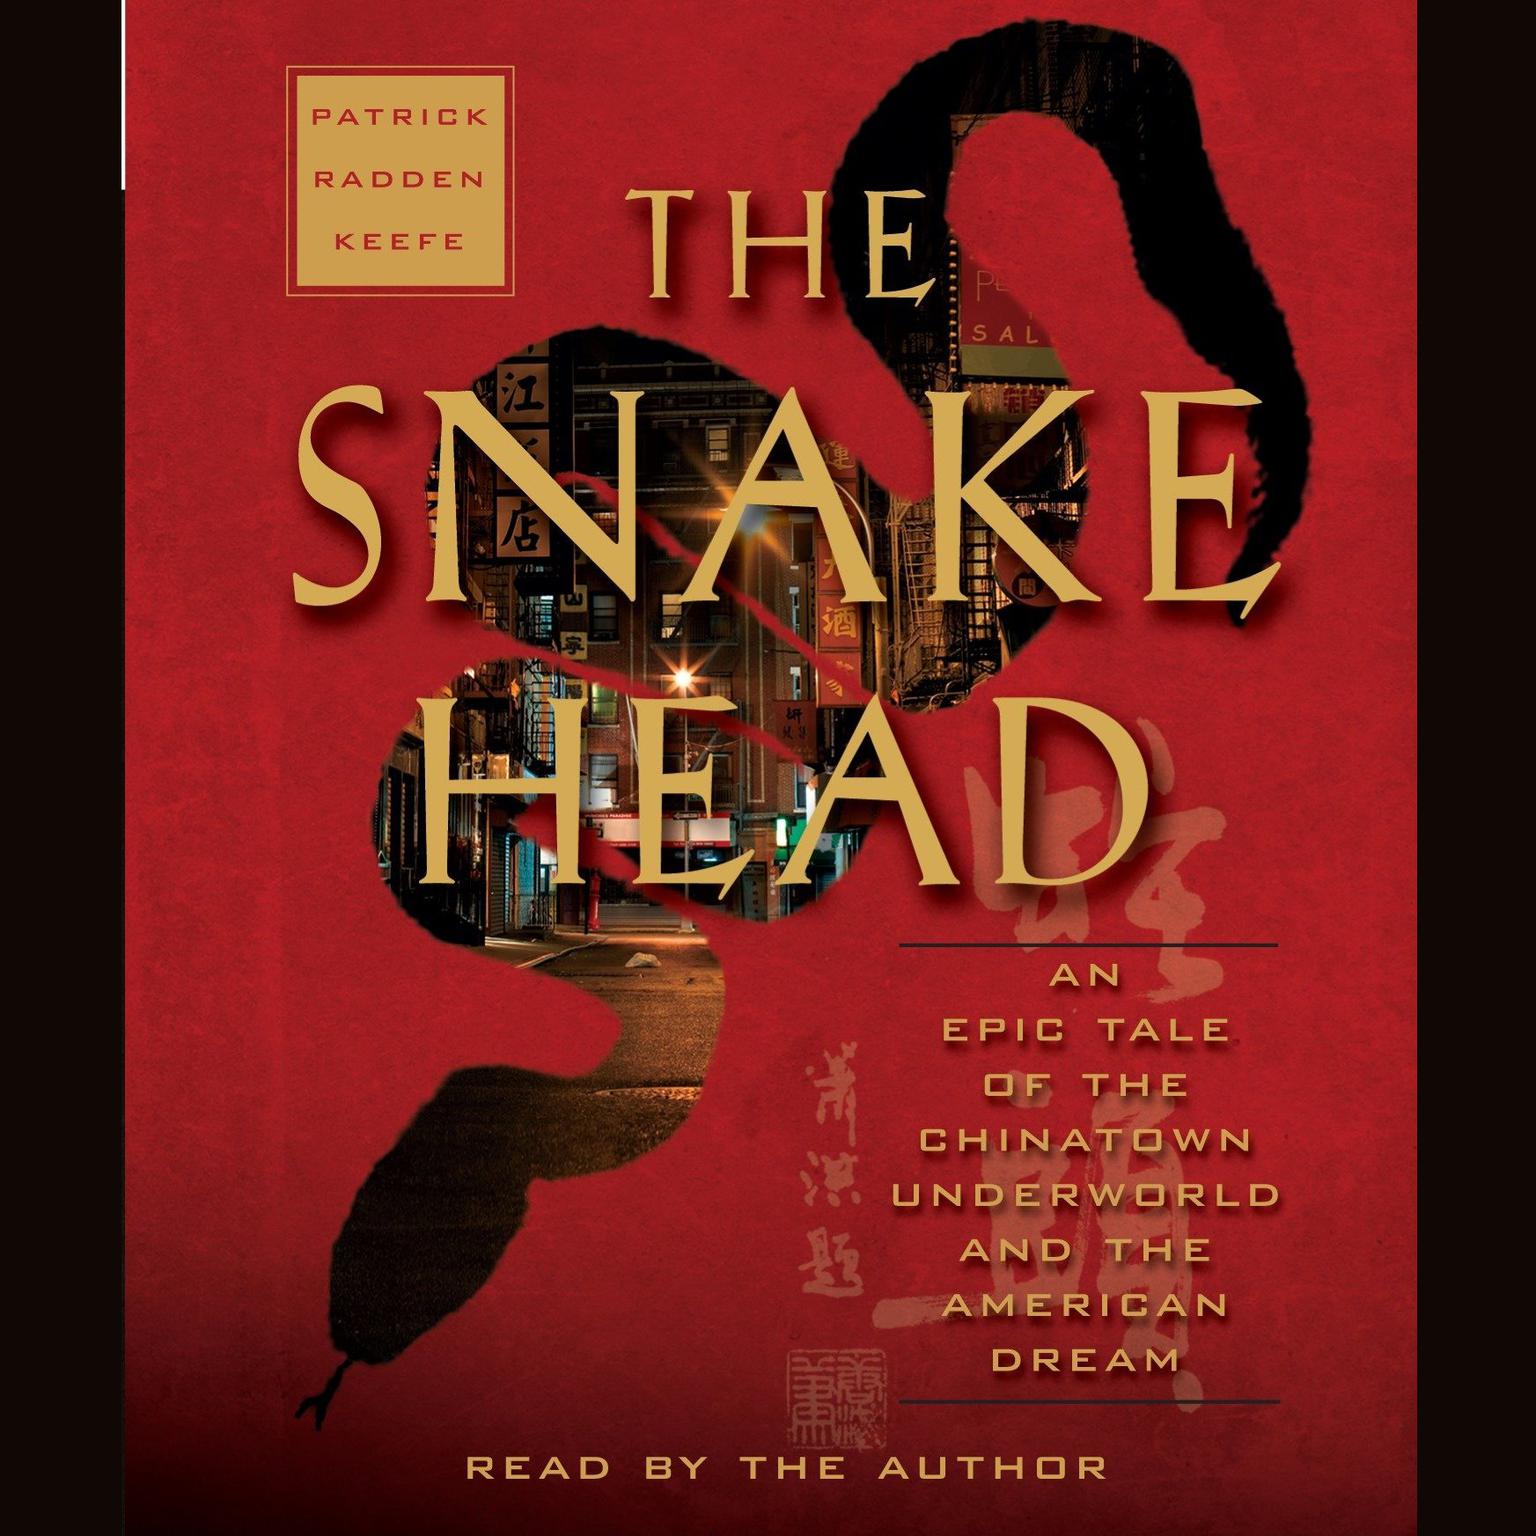 The Snakehead (Abridged): An Epic Tale of the Chinatown Underworld and the American Dream Audiobook, by Patrick Radden Keefe